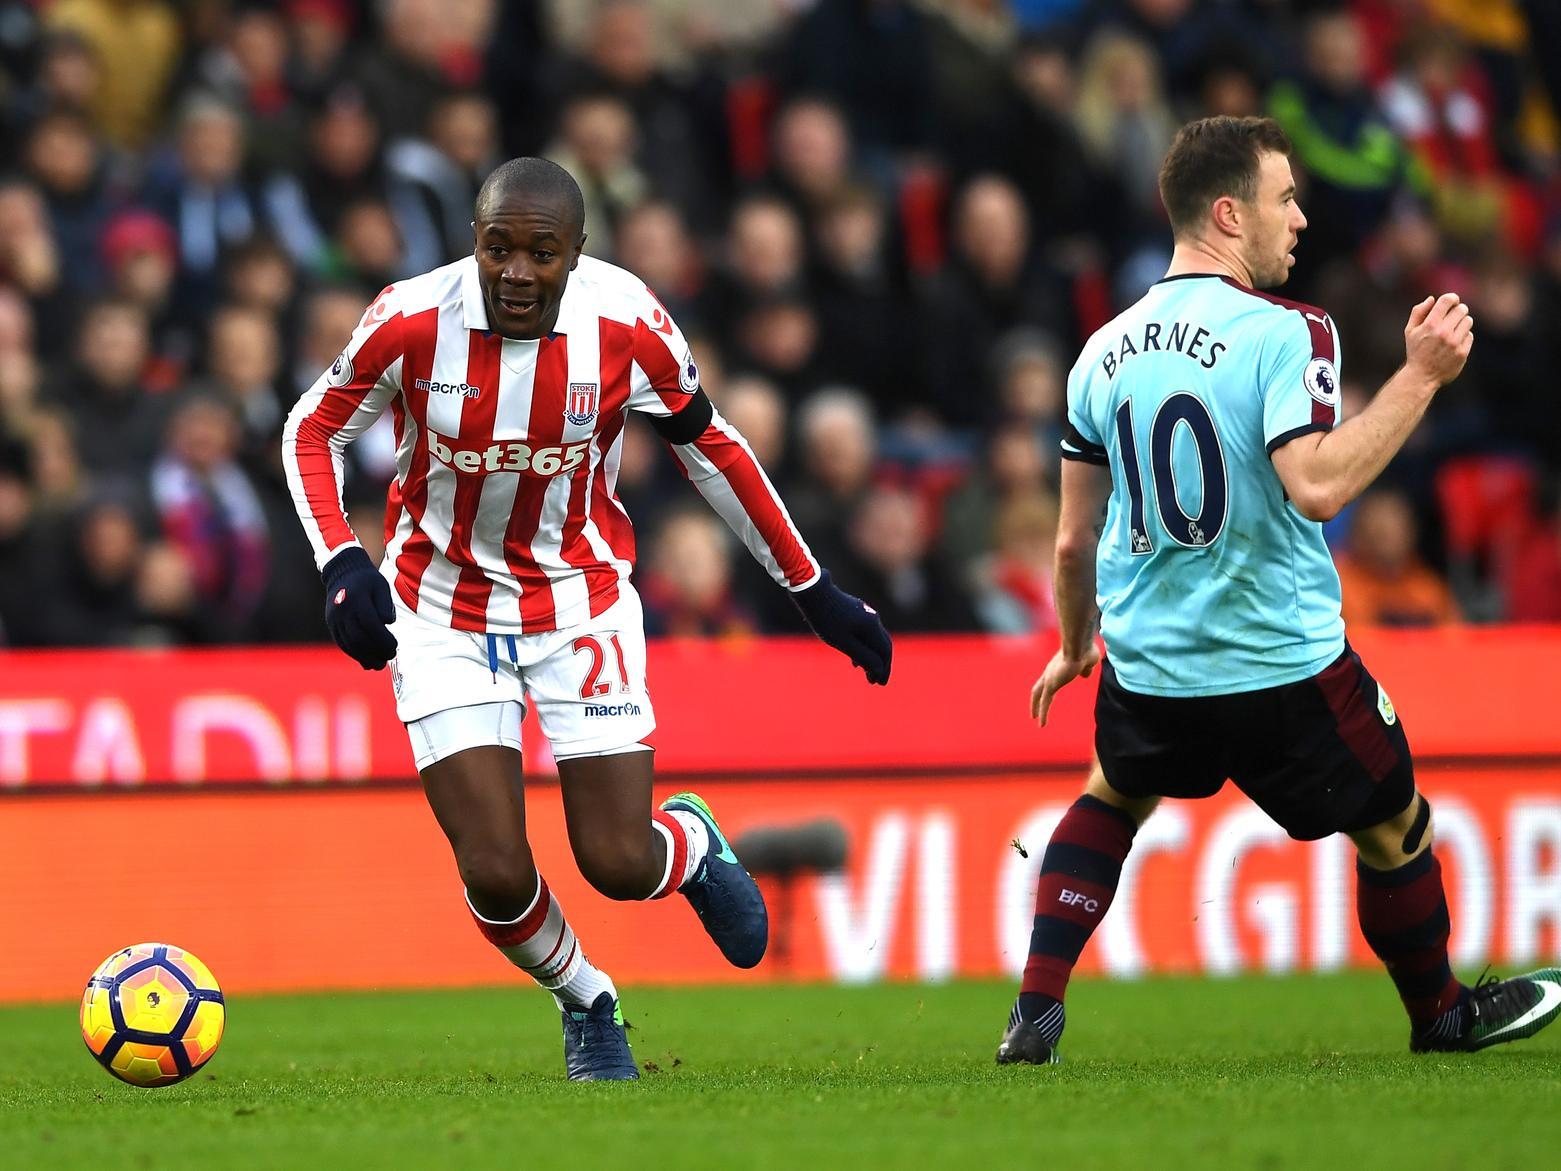 Stoke City have confirmed that they've terminated the contract of their record signing Gianelli Imbula. He spent a large portion of his four year spell out on loan, after failing to impress his club. (SCFC official website)